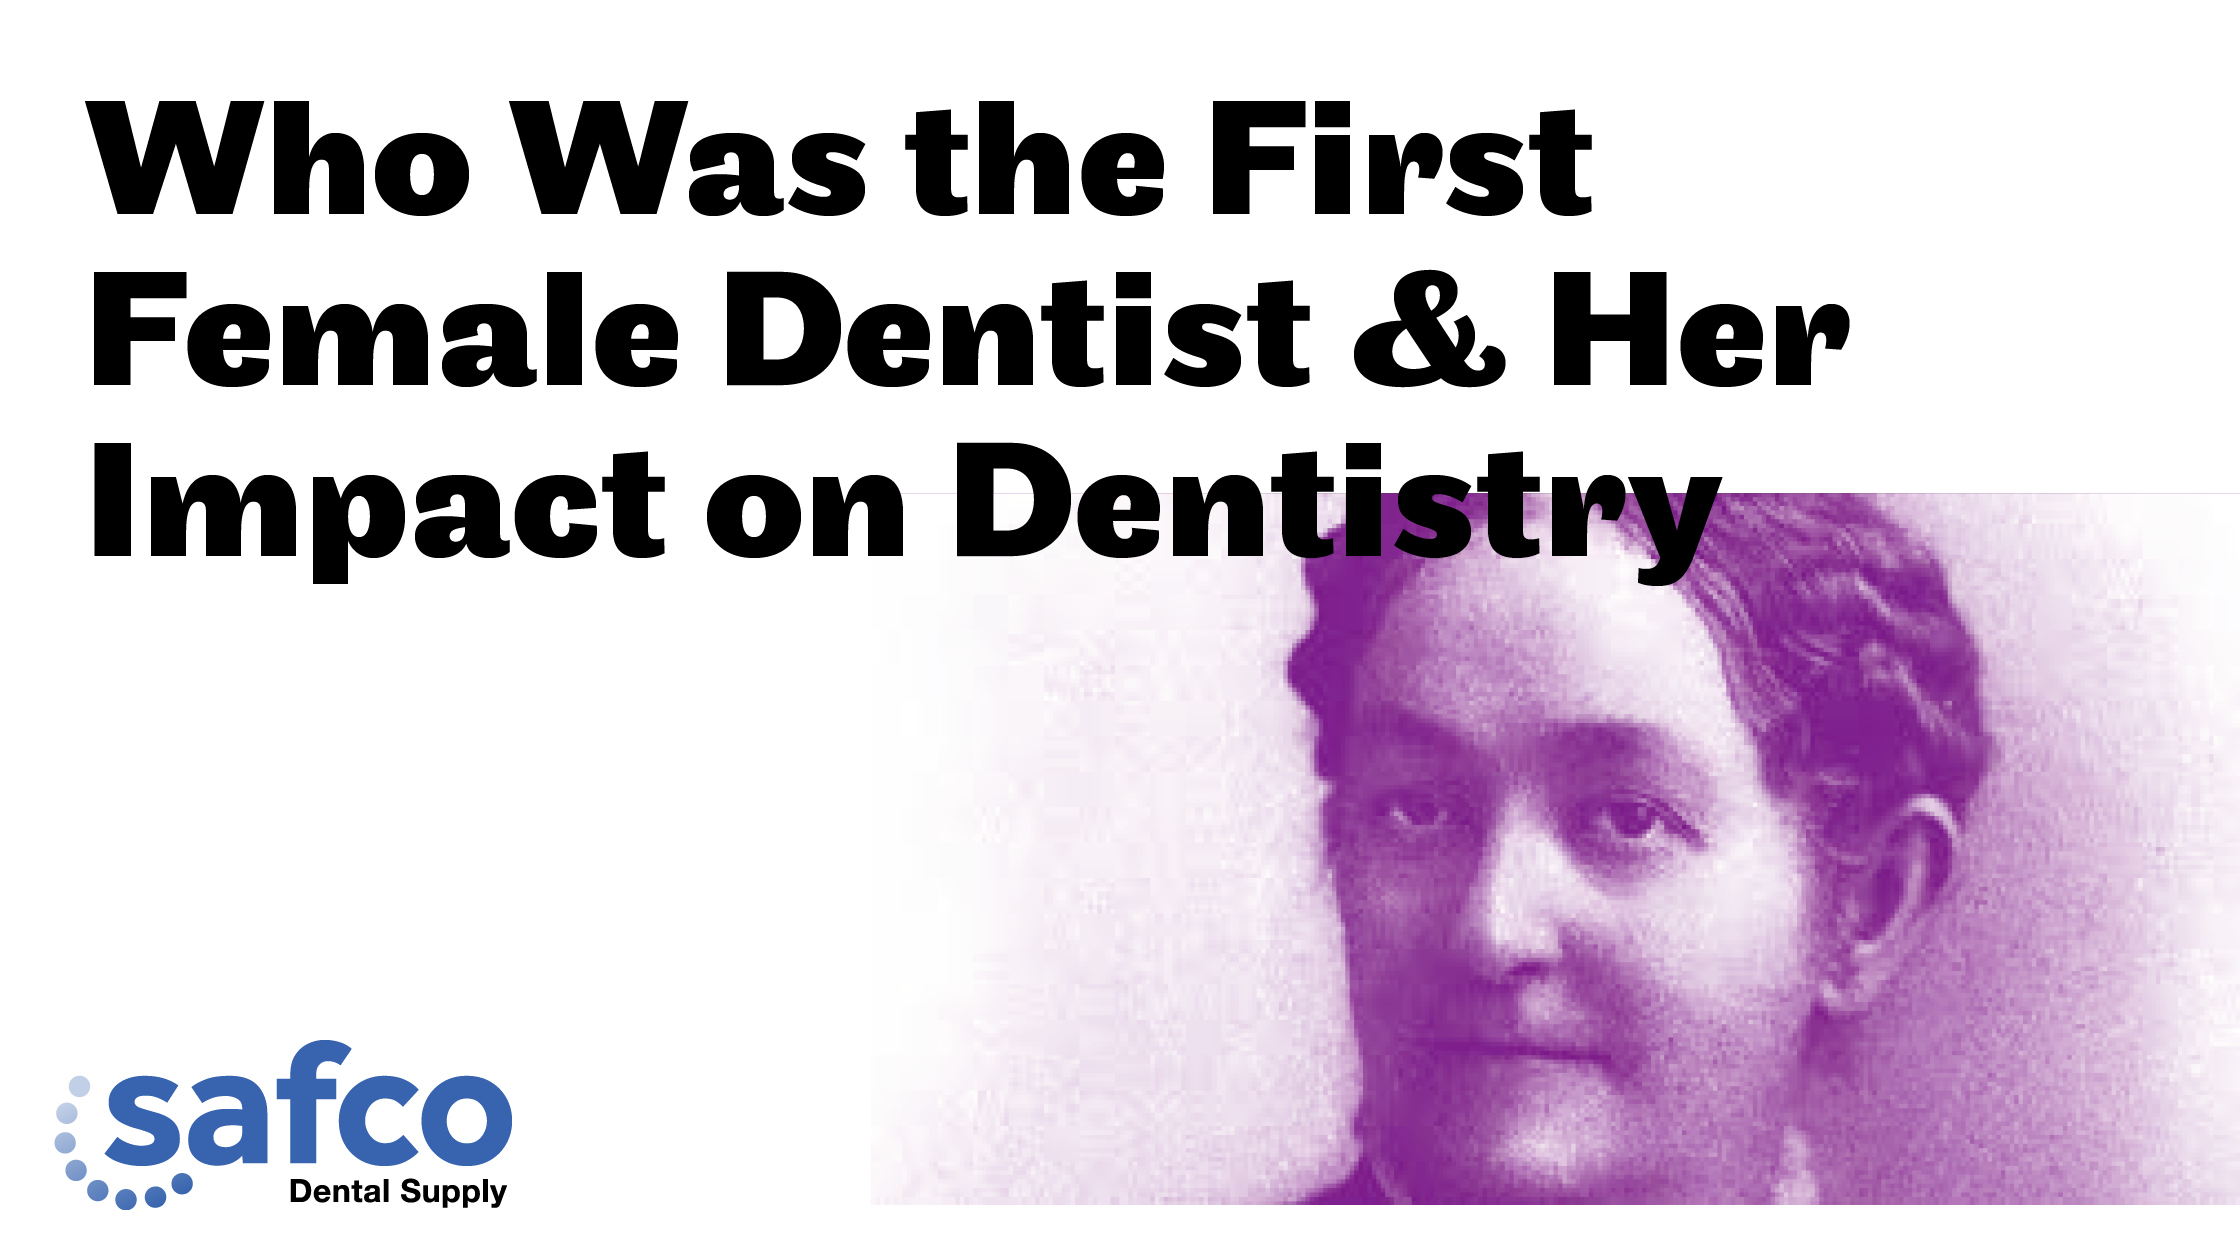 Who Was the First Female Dentist & Her Impact on Dentistry